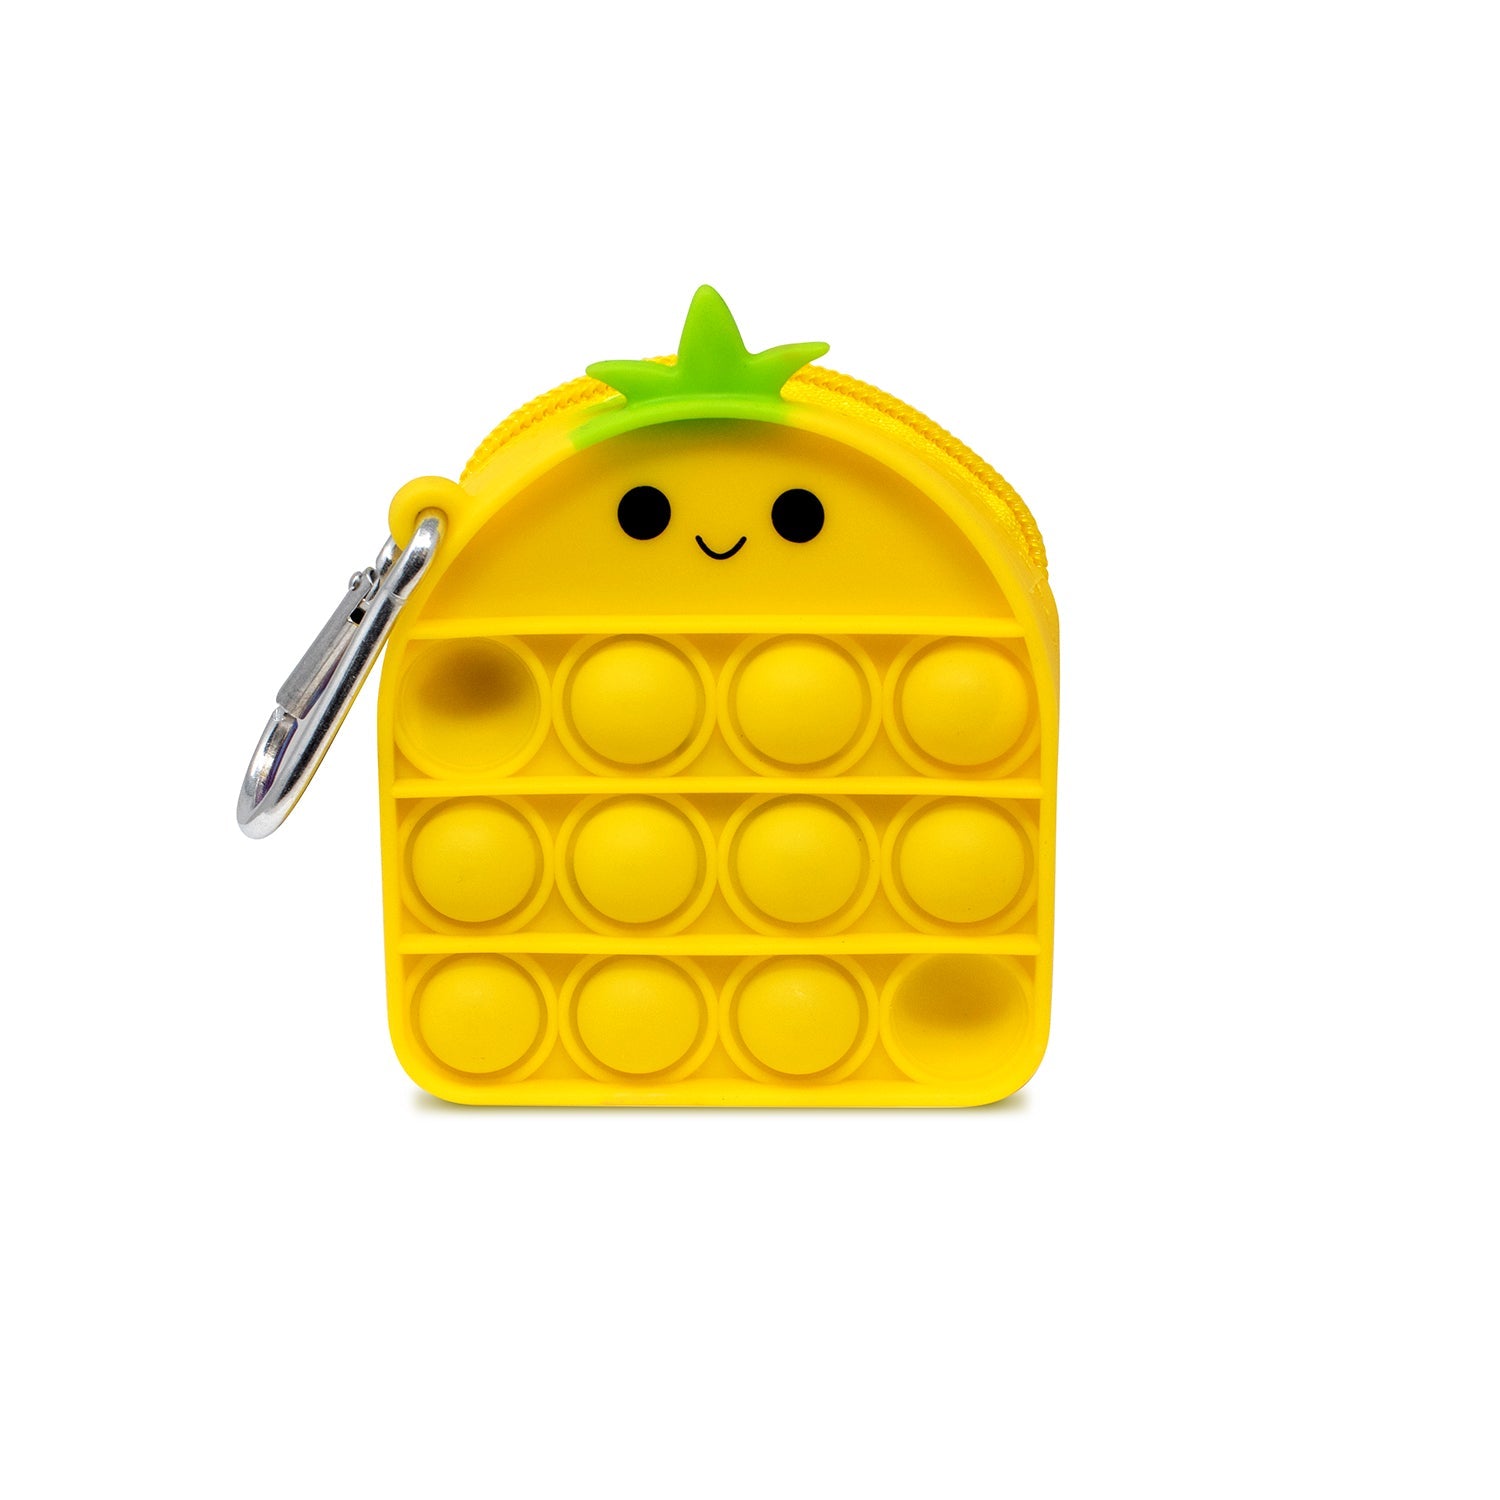 Mini Bubble Pop Zip Coin Purse. This fidget toy coin purse uses high quality silicone rubber materials. Not just a toy, it is also practical coin purse that can store small items. Just pressing the bubble down makes a big, crisp popping sound! Fashionable cute designs come in 4 different colors and styles, including Pineapple. 